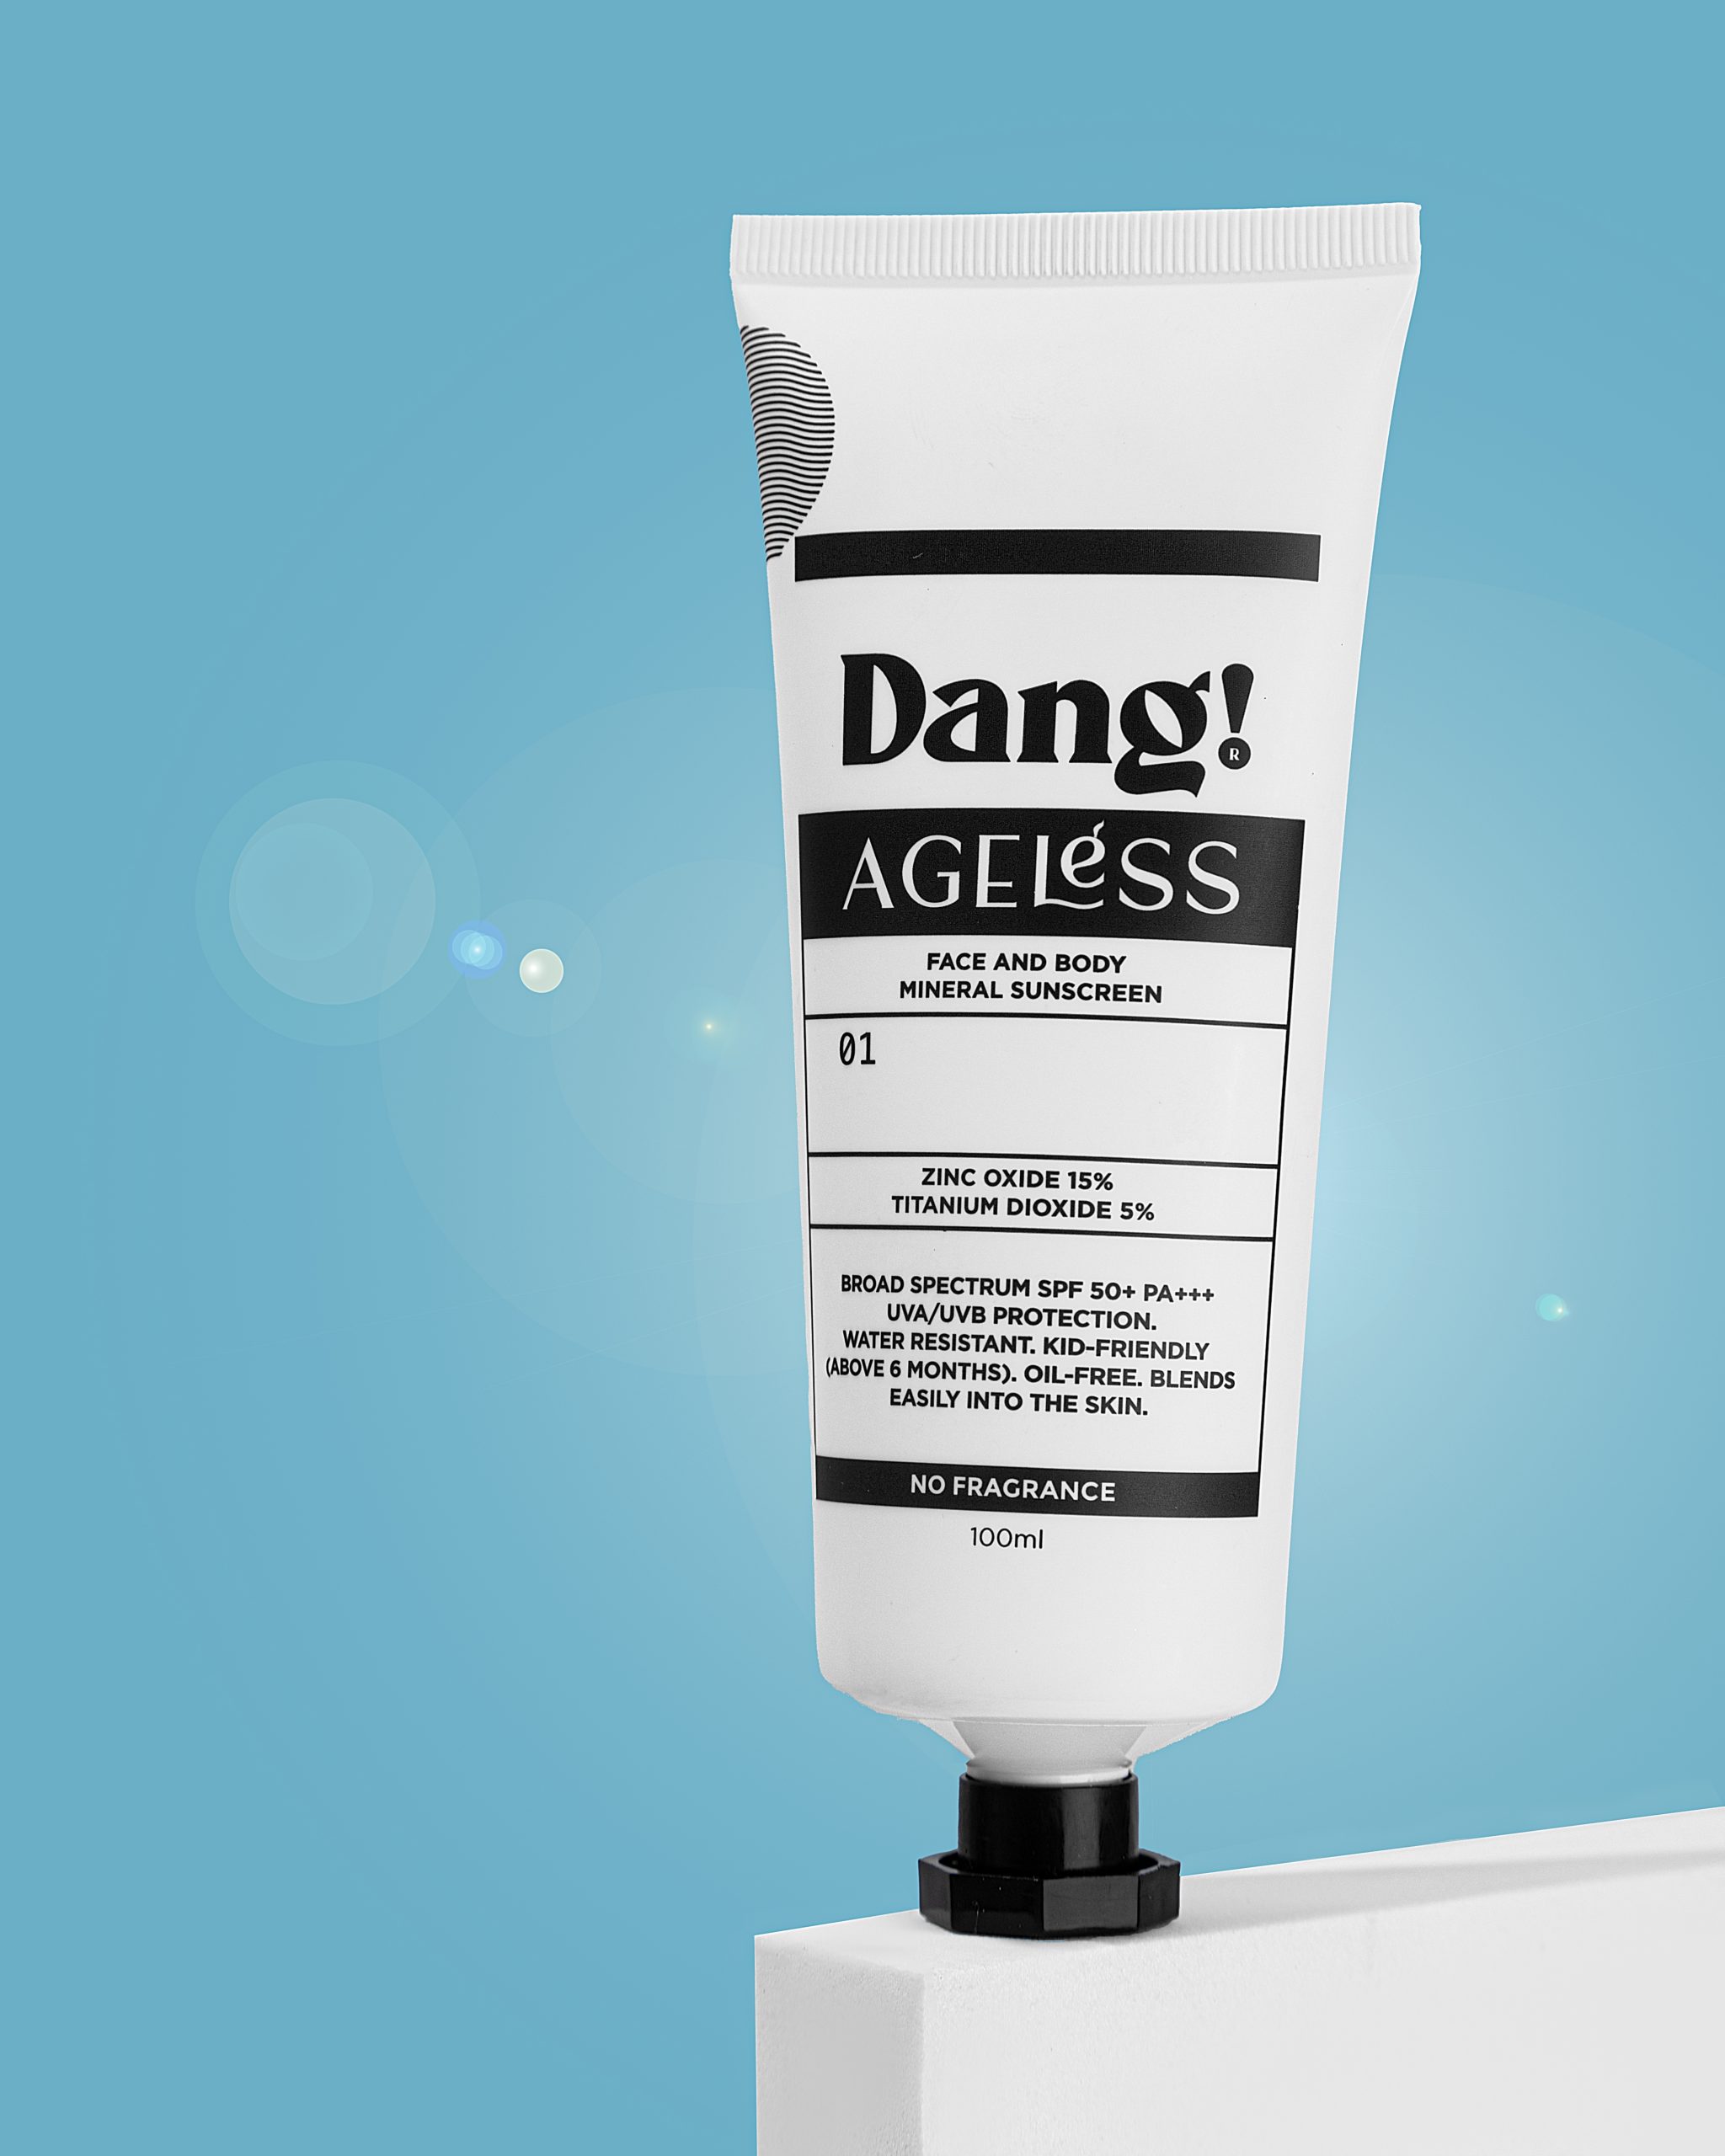 Dang! Ageless Face and Body Mineral sunscreen.